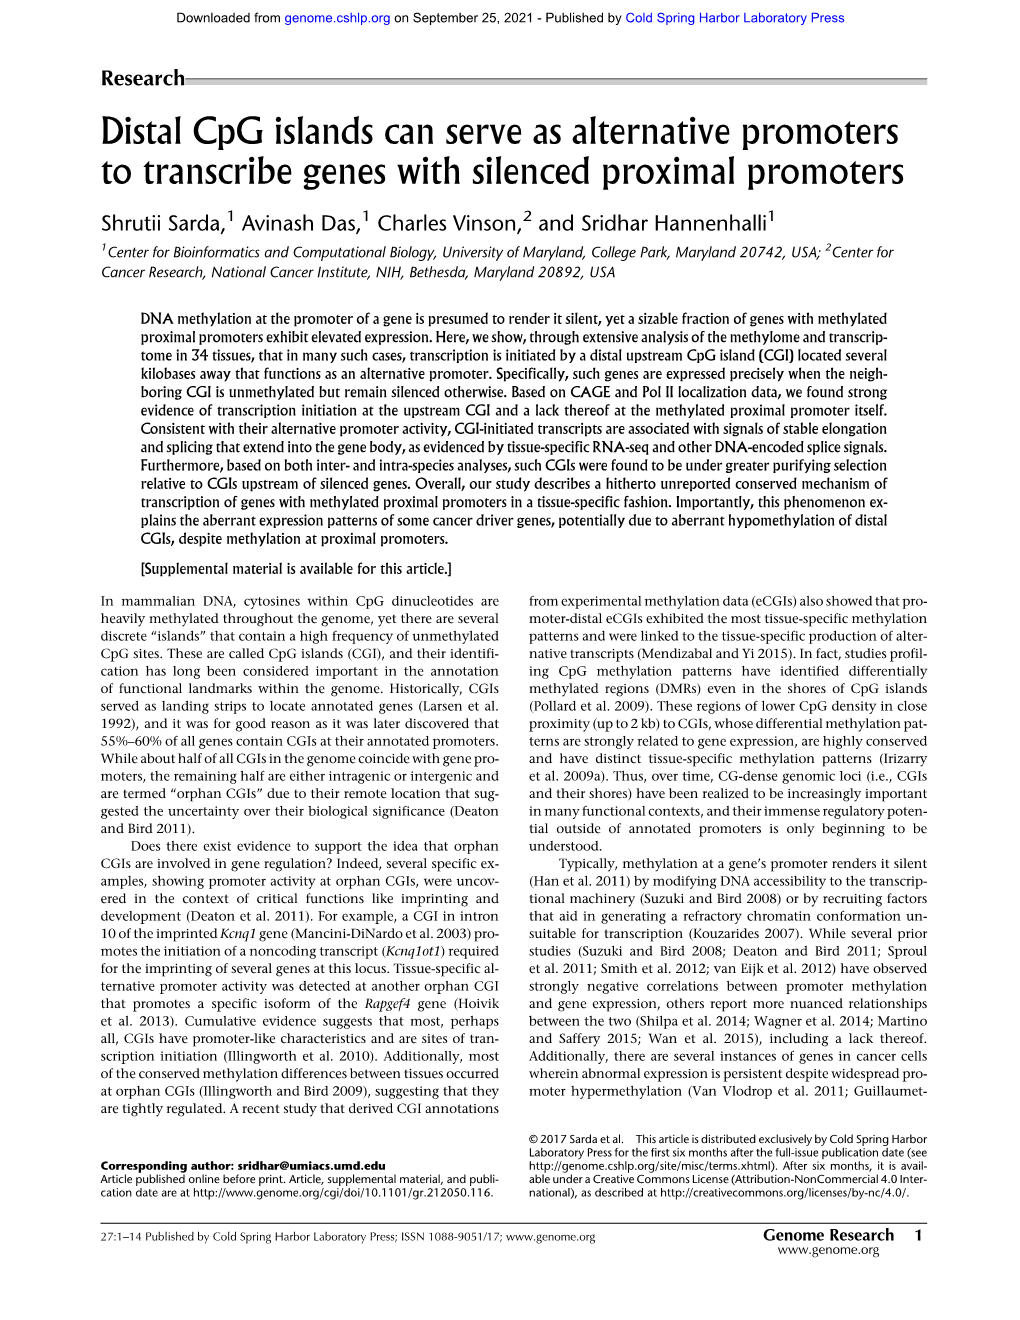 Distal Cpg Islands Can Serve As Alternative Promoters to Transcribe Genes with Silenced Proximal Promoters